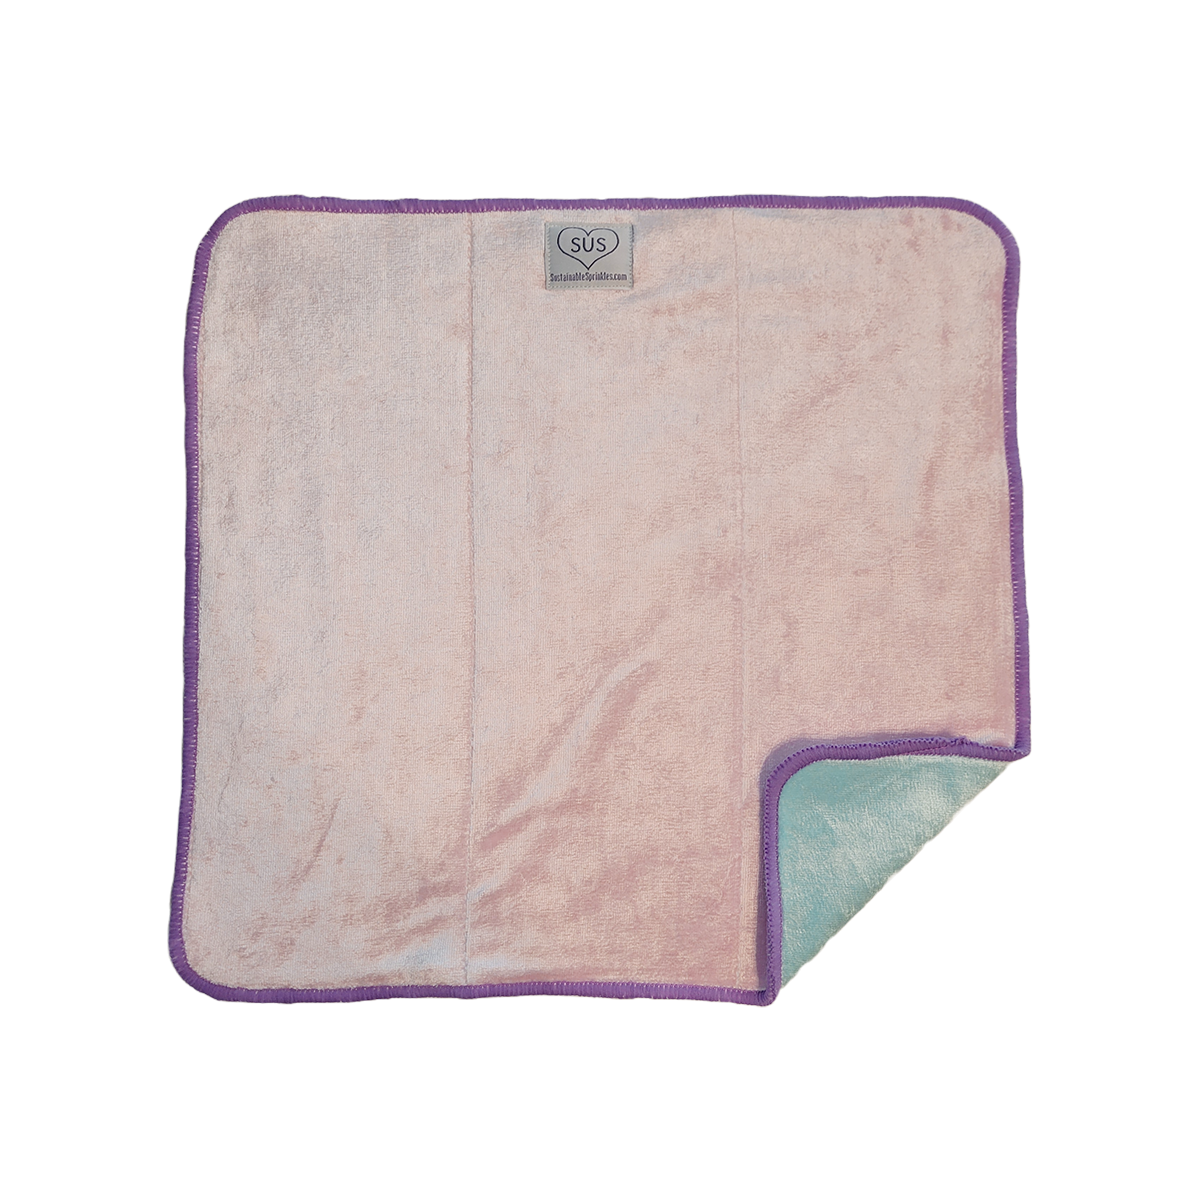 Bamboo Velour / Bamboo Cotton TriFold  Cotton Candy